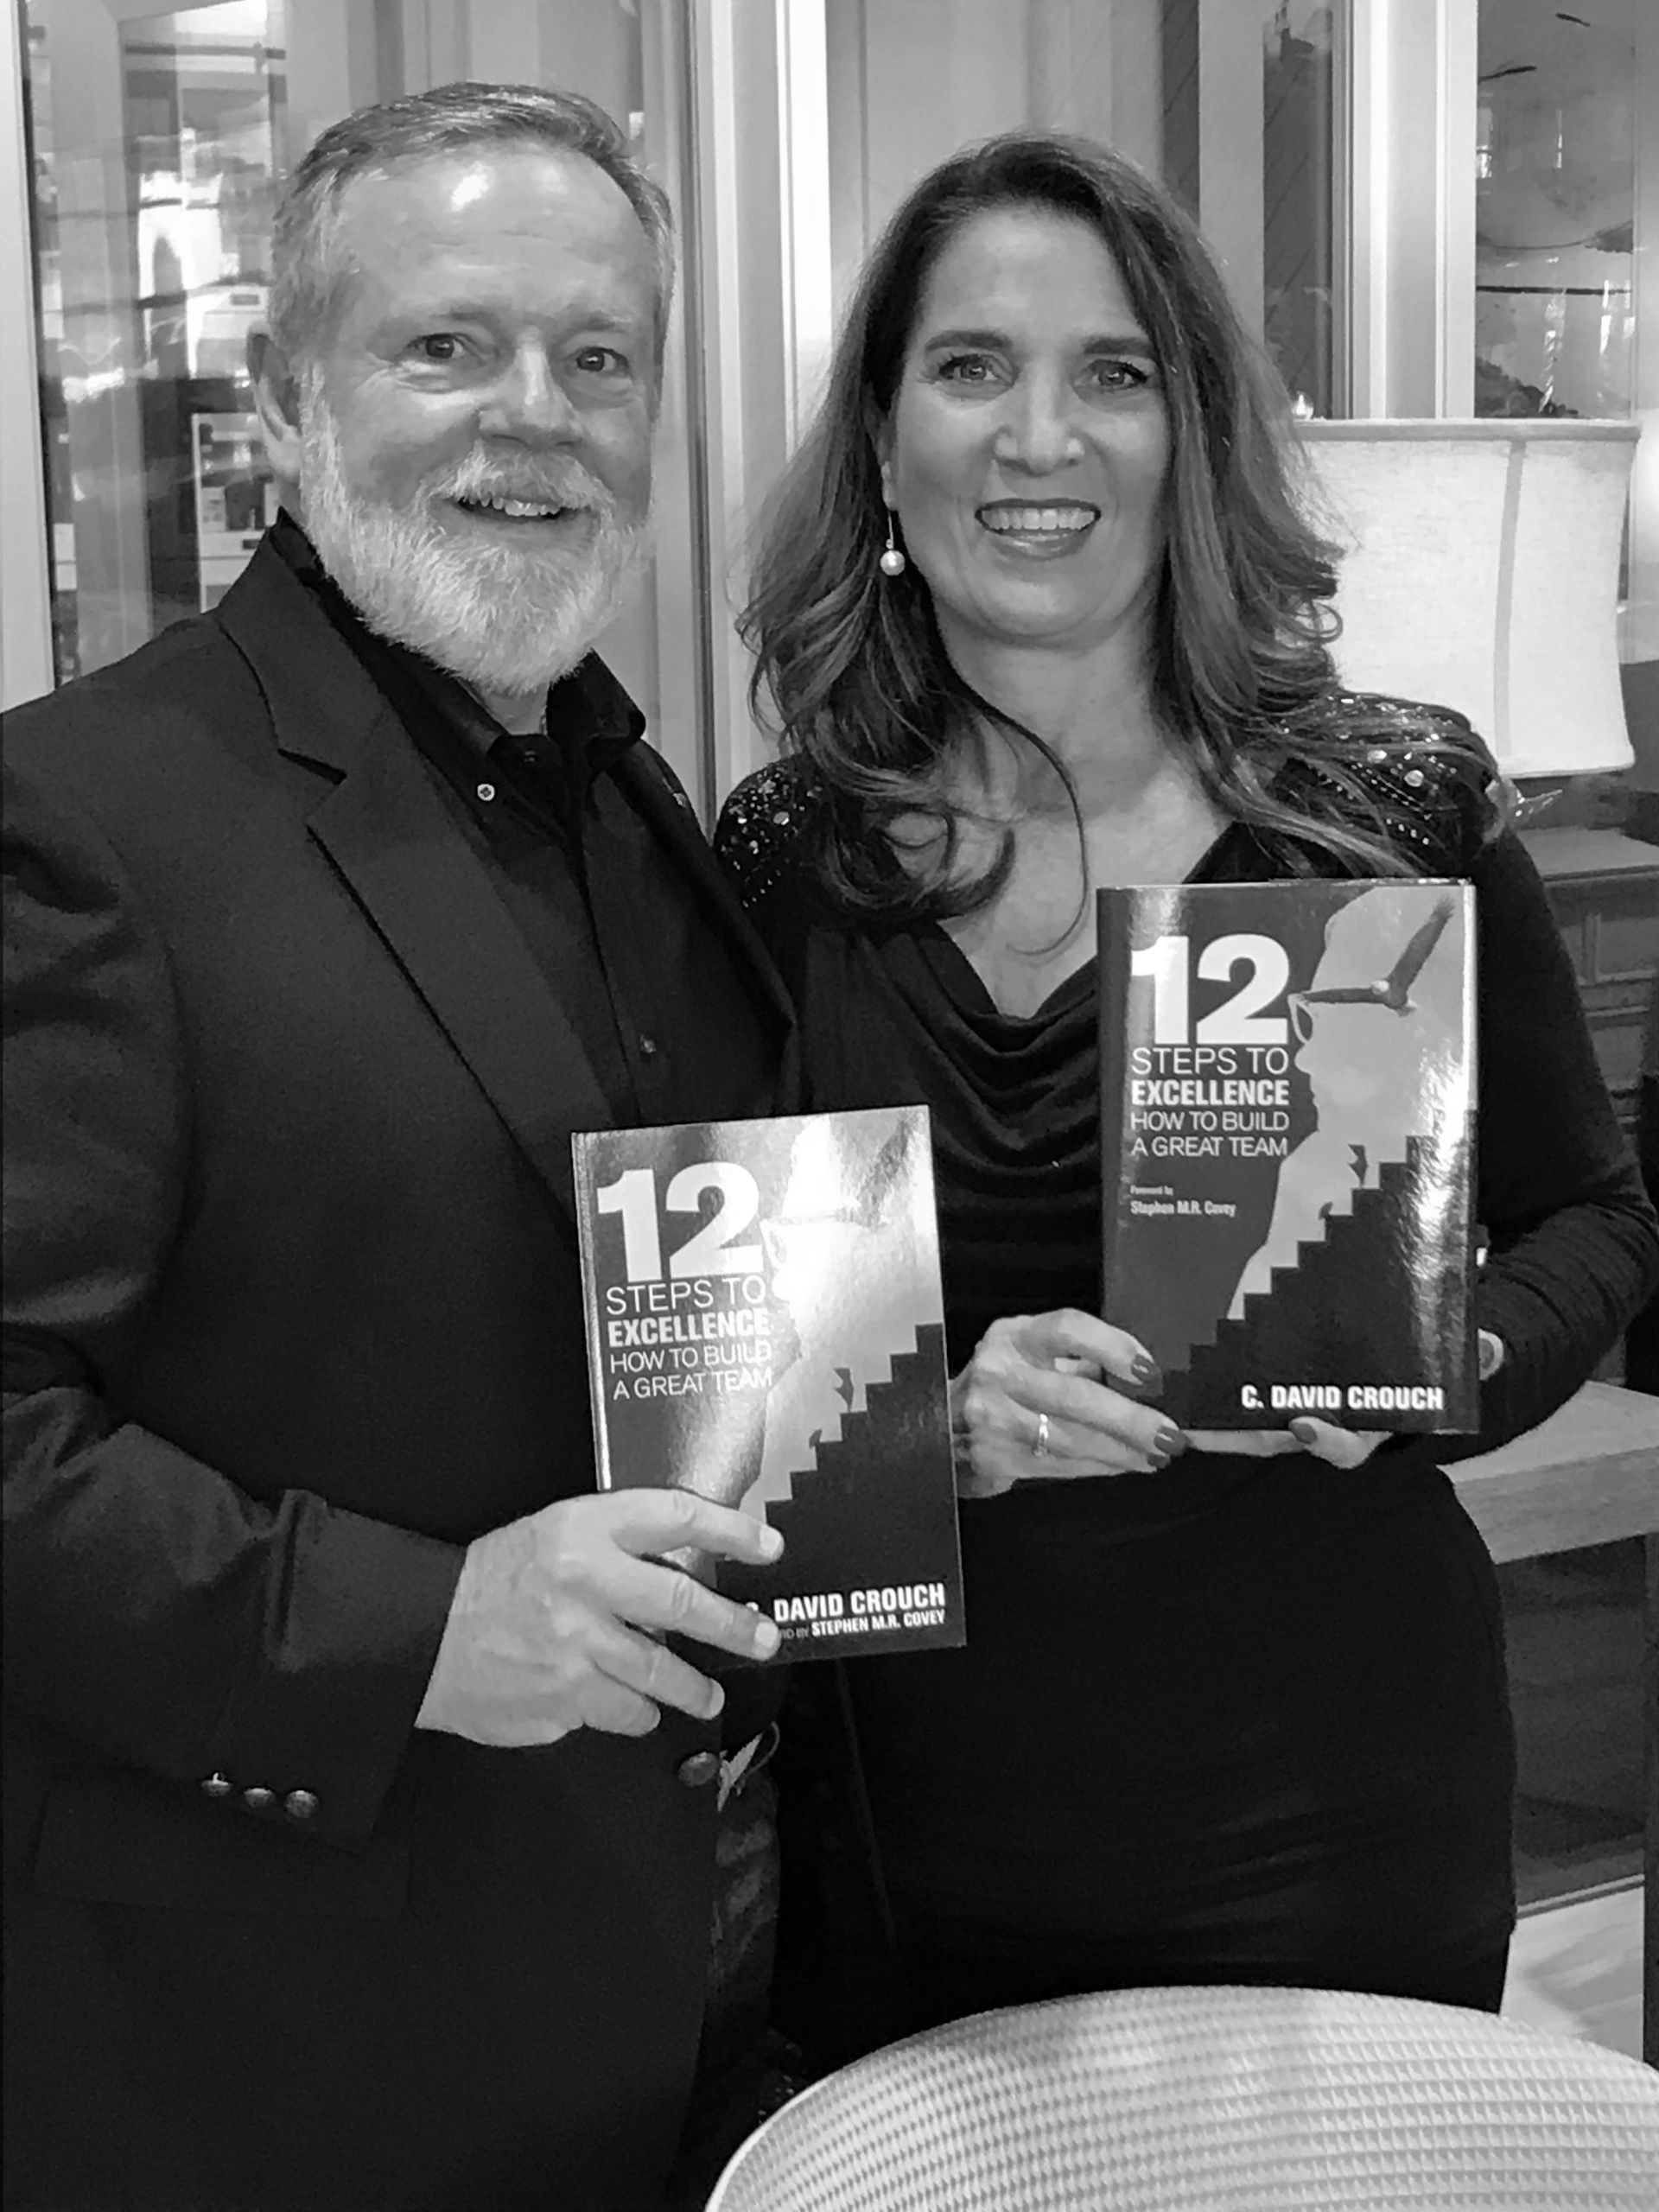 My wife and I at the book launch!